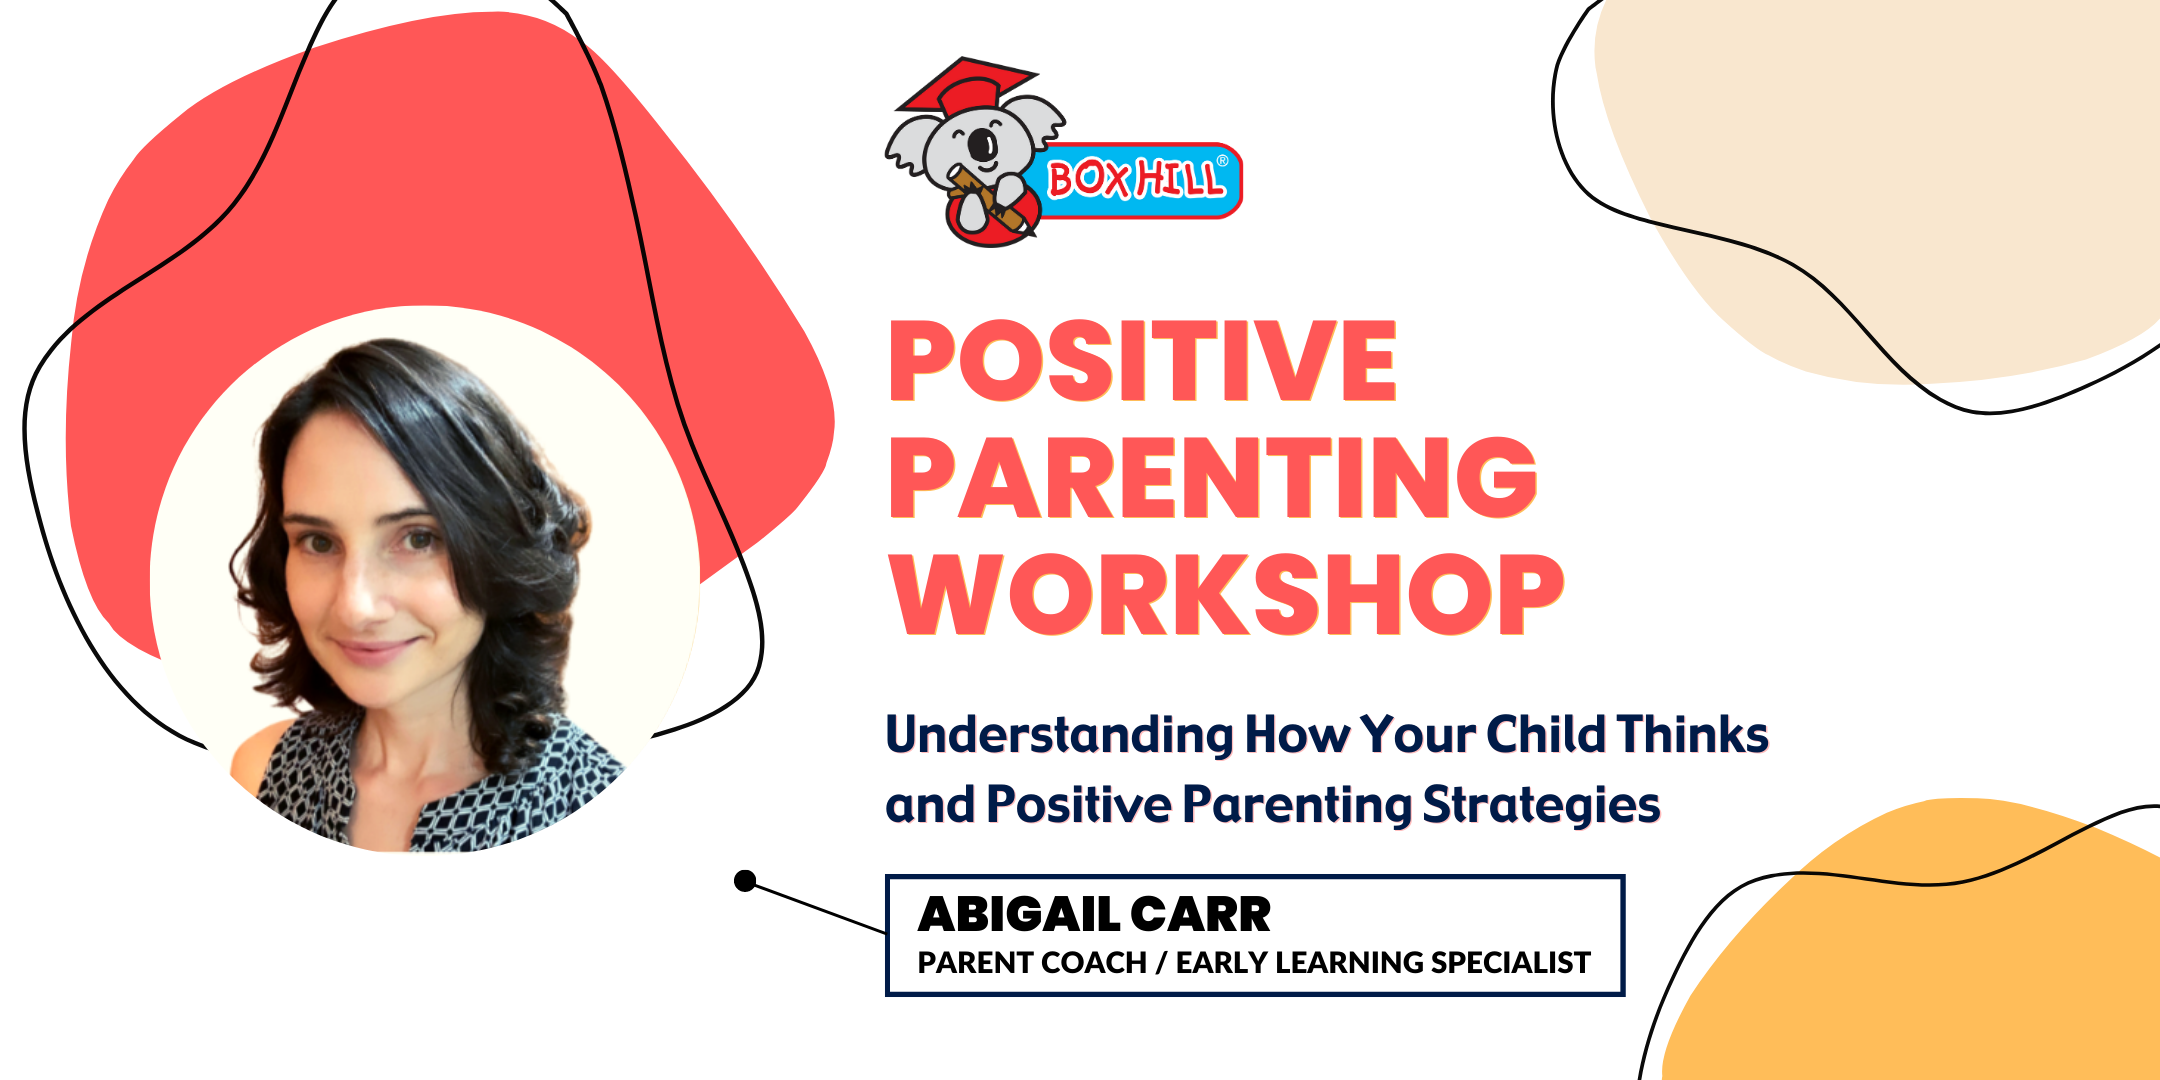 Positive Parenting Workshop – Understanding How Your Child Thinks and Positive Parenting Strategies